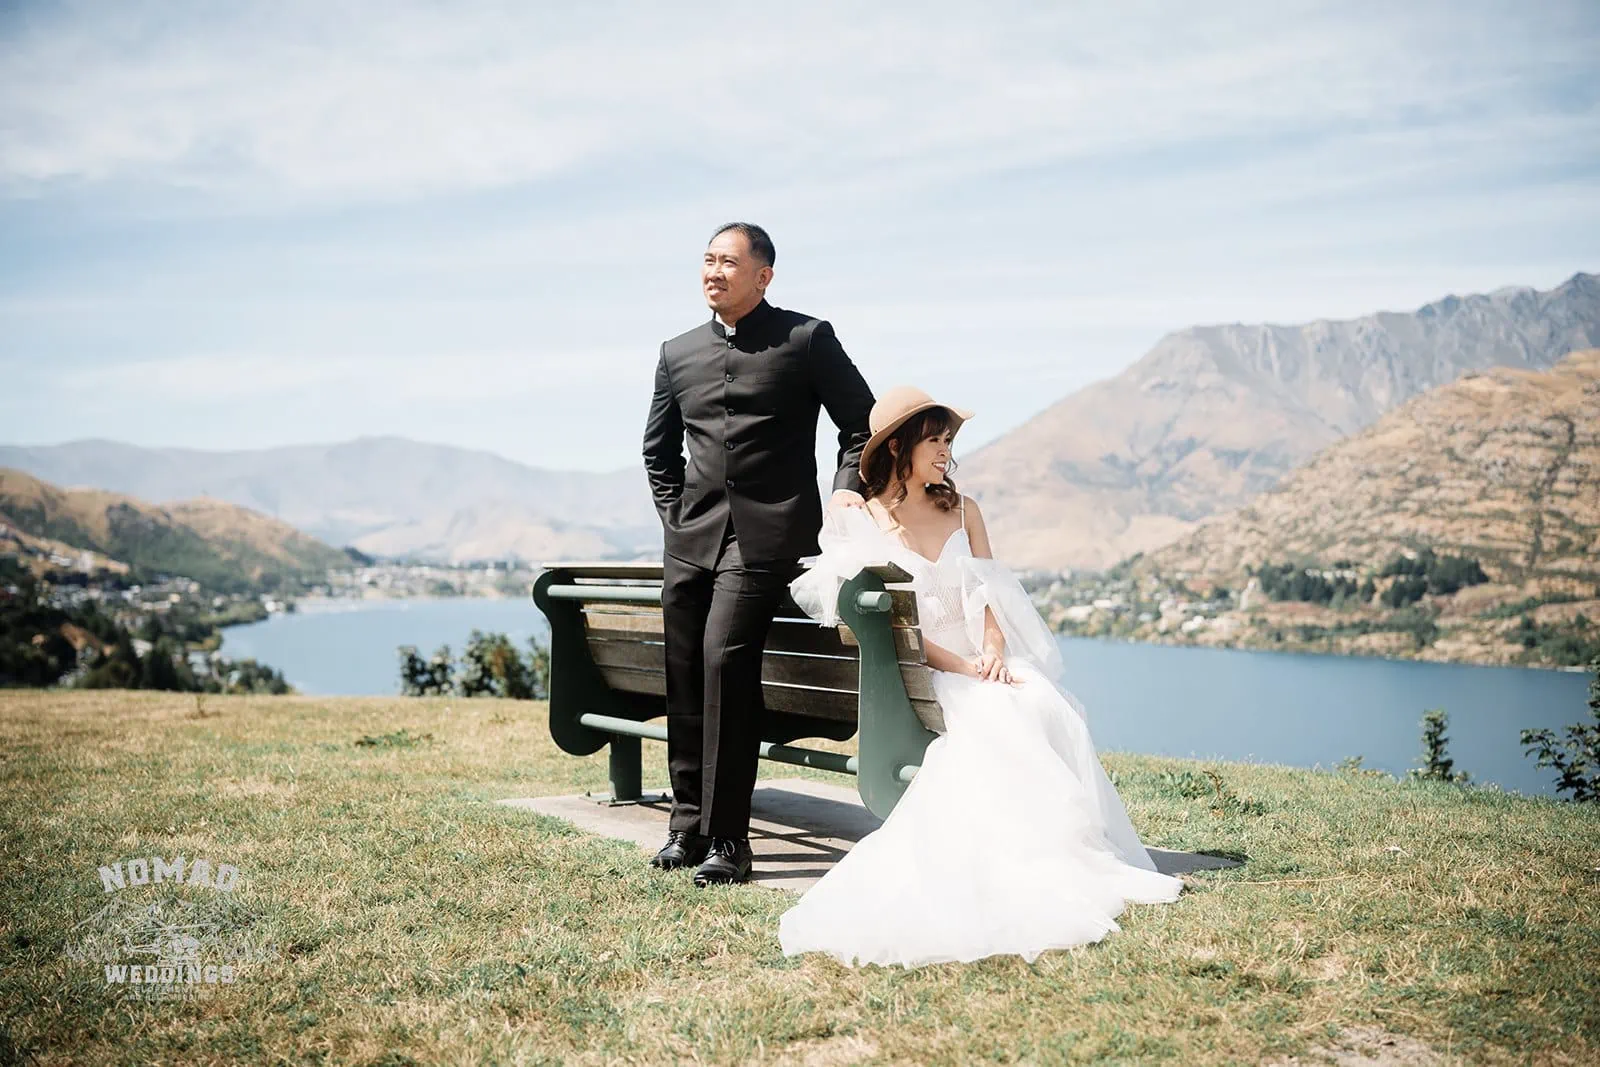 Nhi & Nicholas' Pre-Wedding Shoot in Queenstown, NZ captures a bride and groom sitting on a bench by a lake.